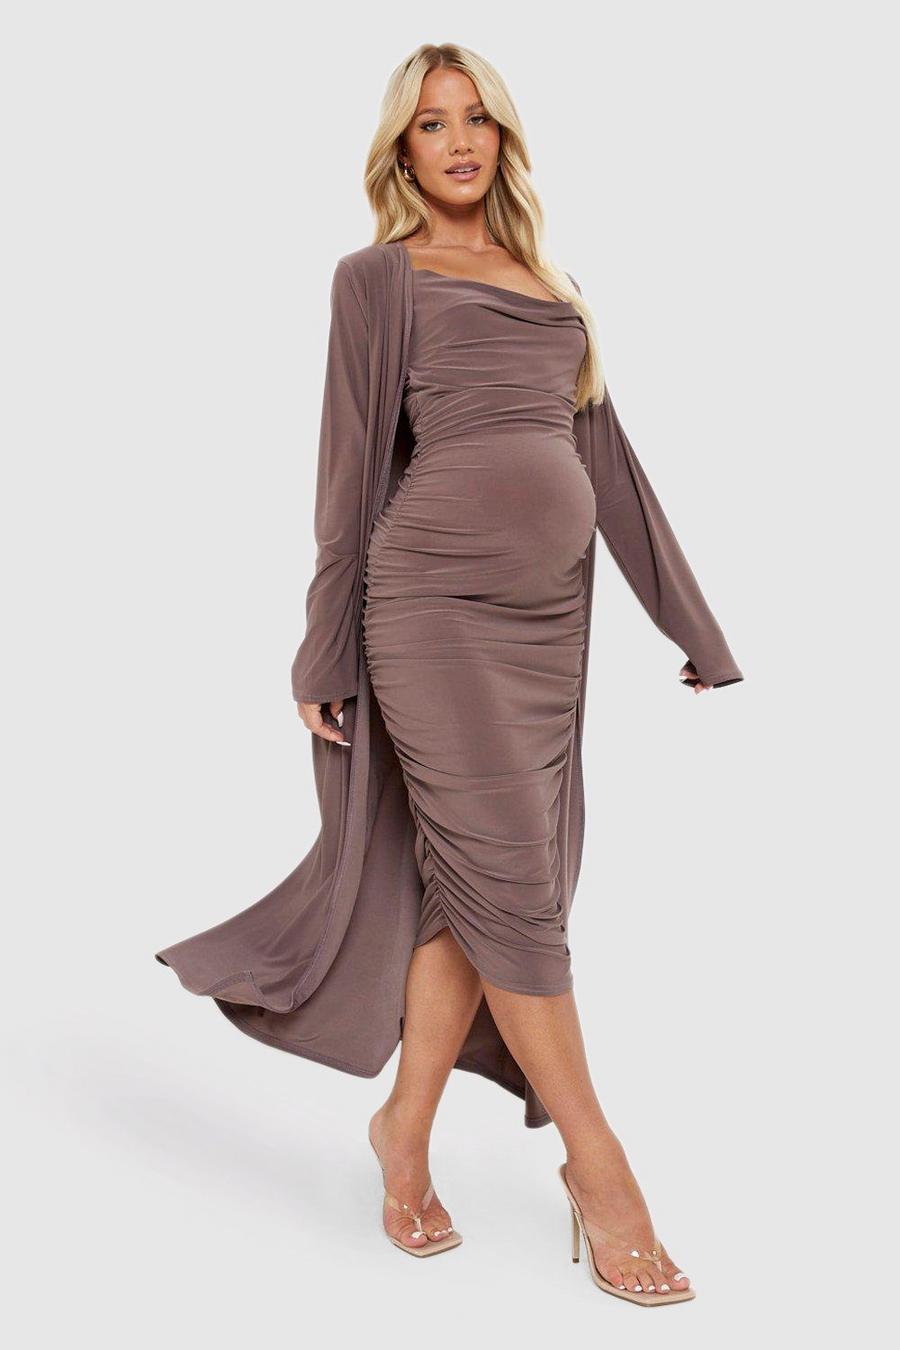 Mocha beis Maternity Strappy Cowl Neck Dress And Duster Coat